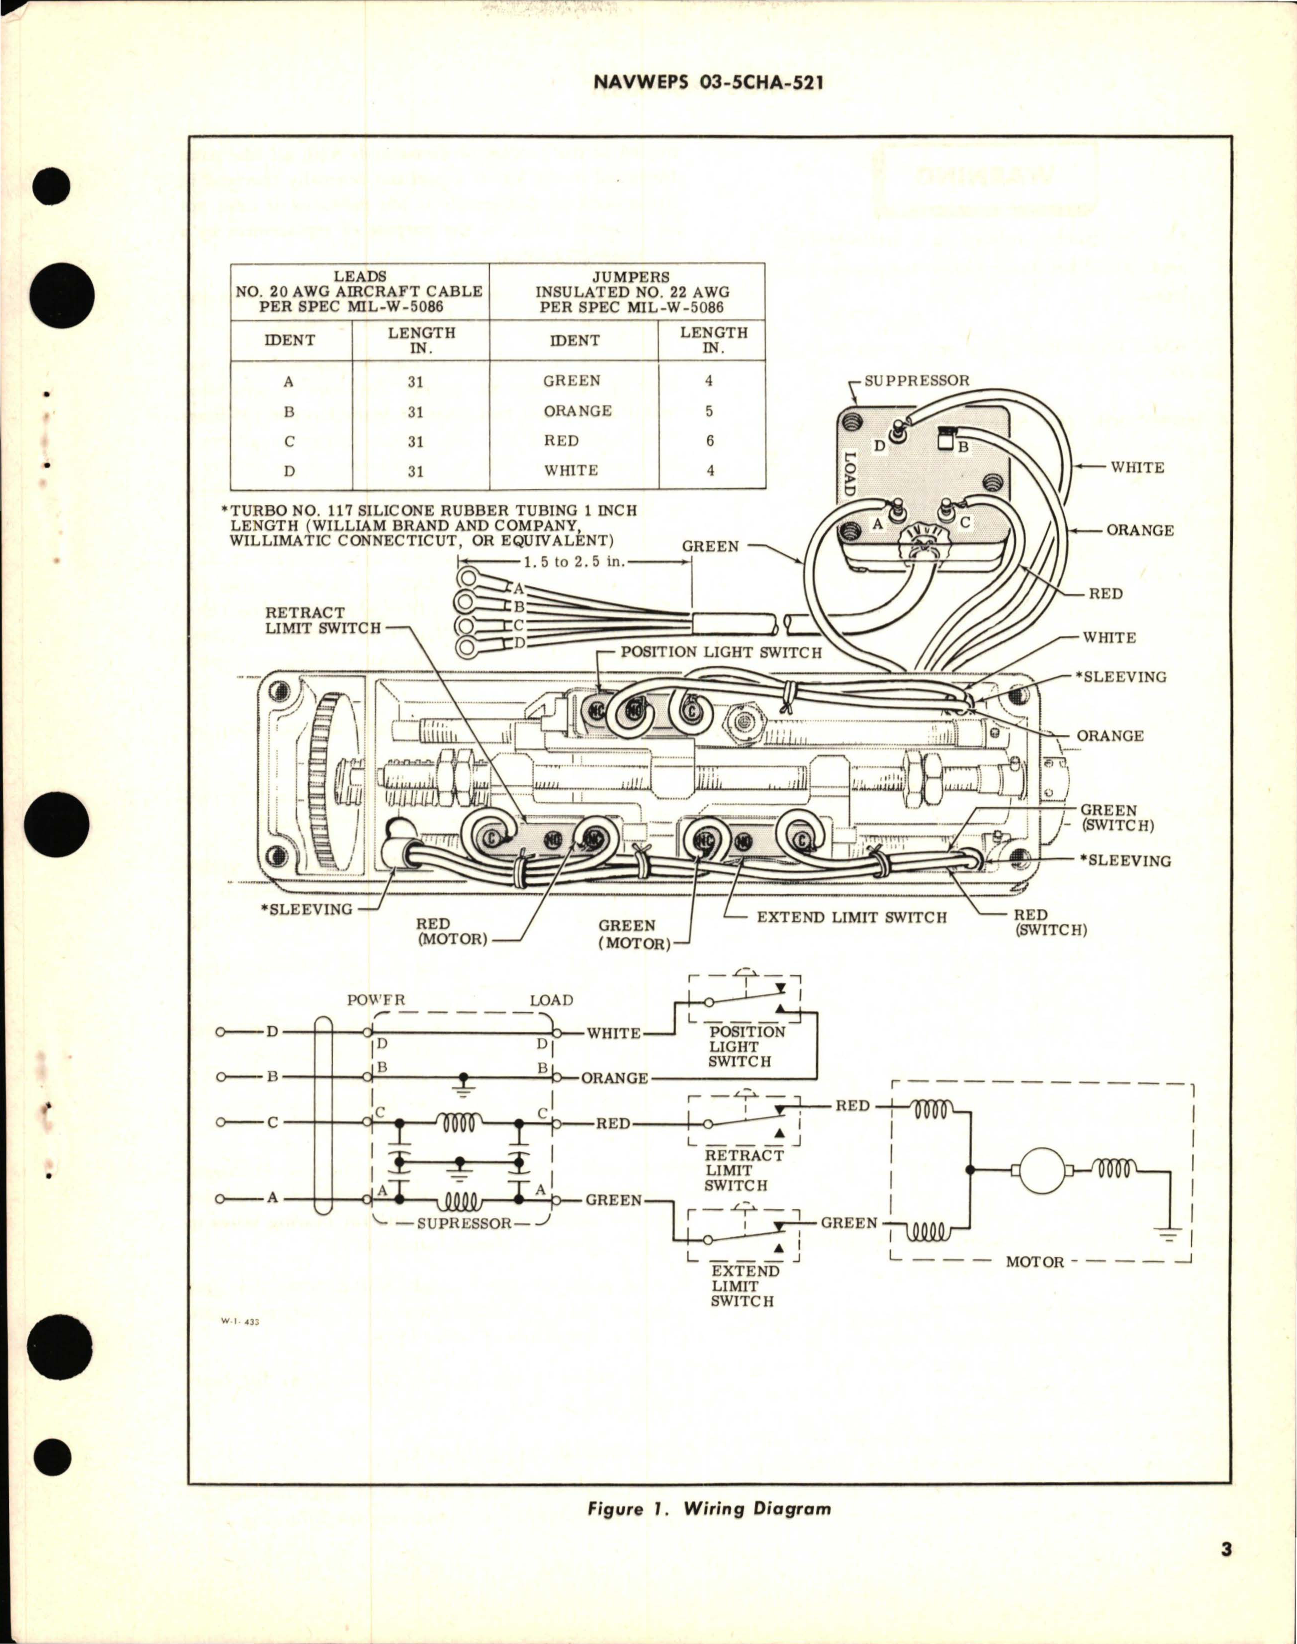 Sample page 5 from AirCorps Library document: Overhaul Instructions with Parts Breakdown for Electromechanical Linear Actuators - Part 38090-1 and 380190-3